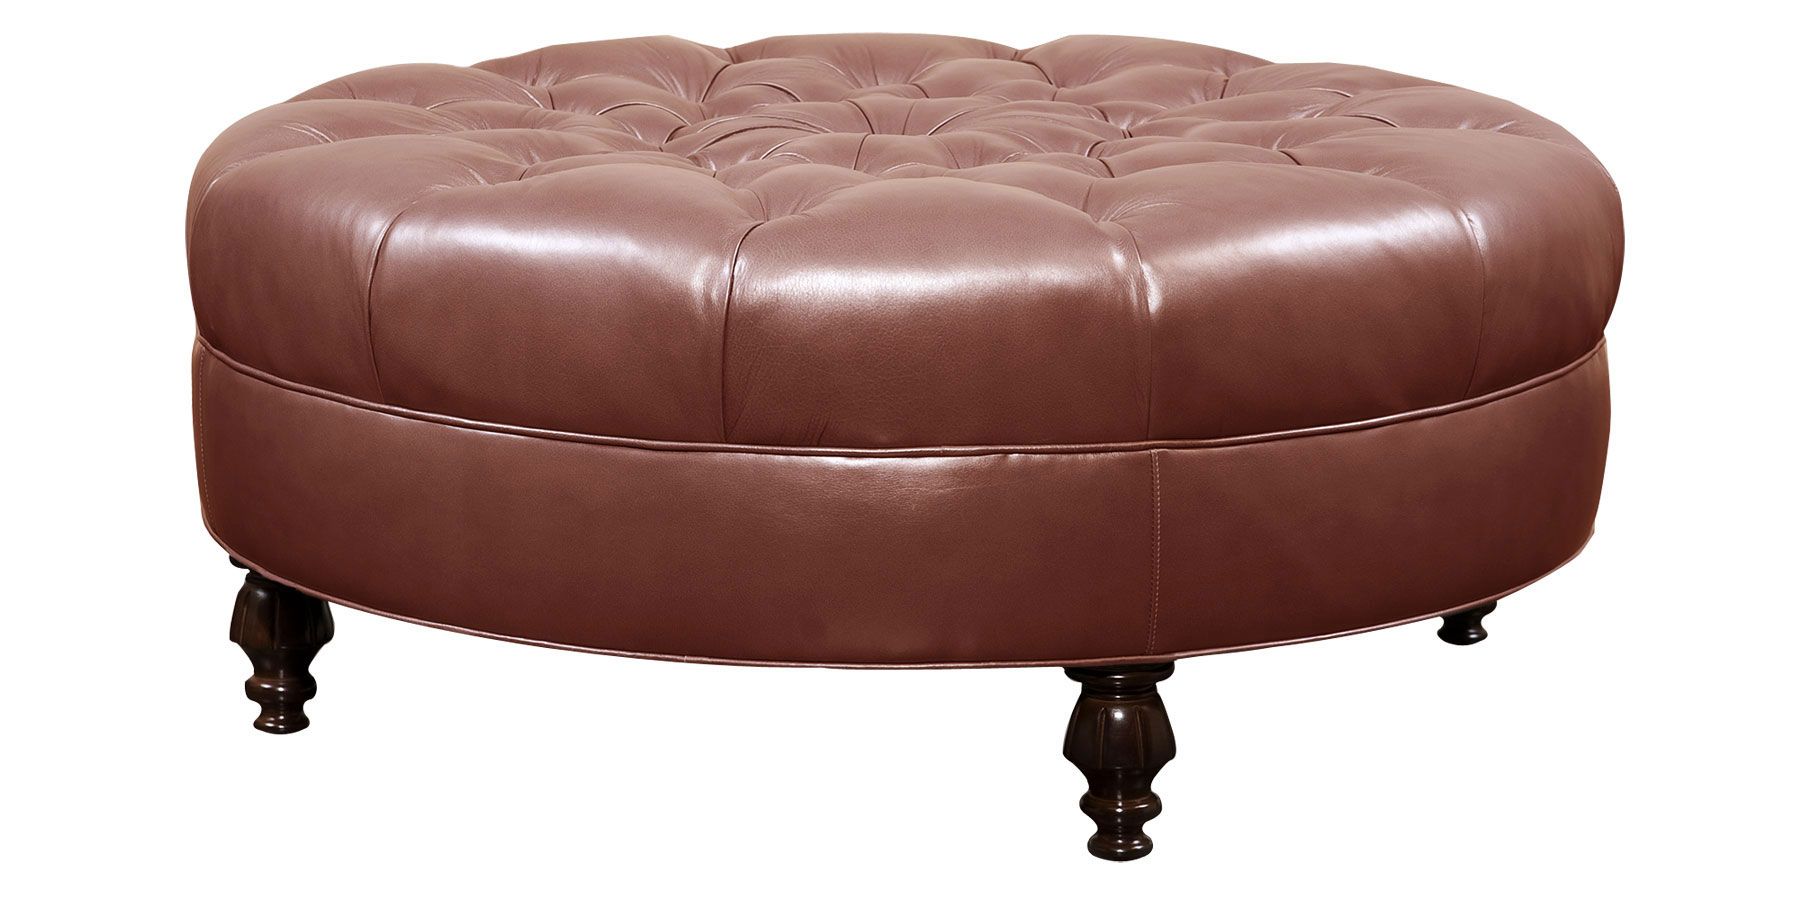 Tufted Round Ottoman Leather Upholstery | Club Furniture For Tufted Ottoman Console Tables (View 15 of 20)